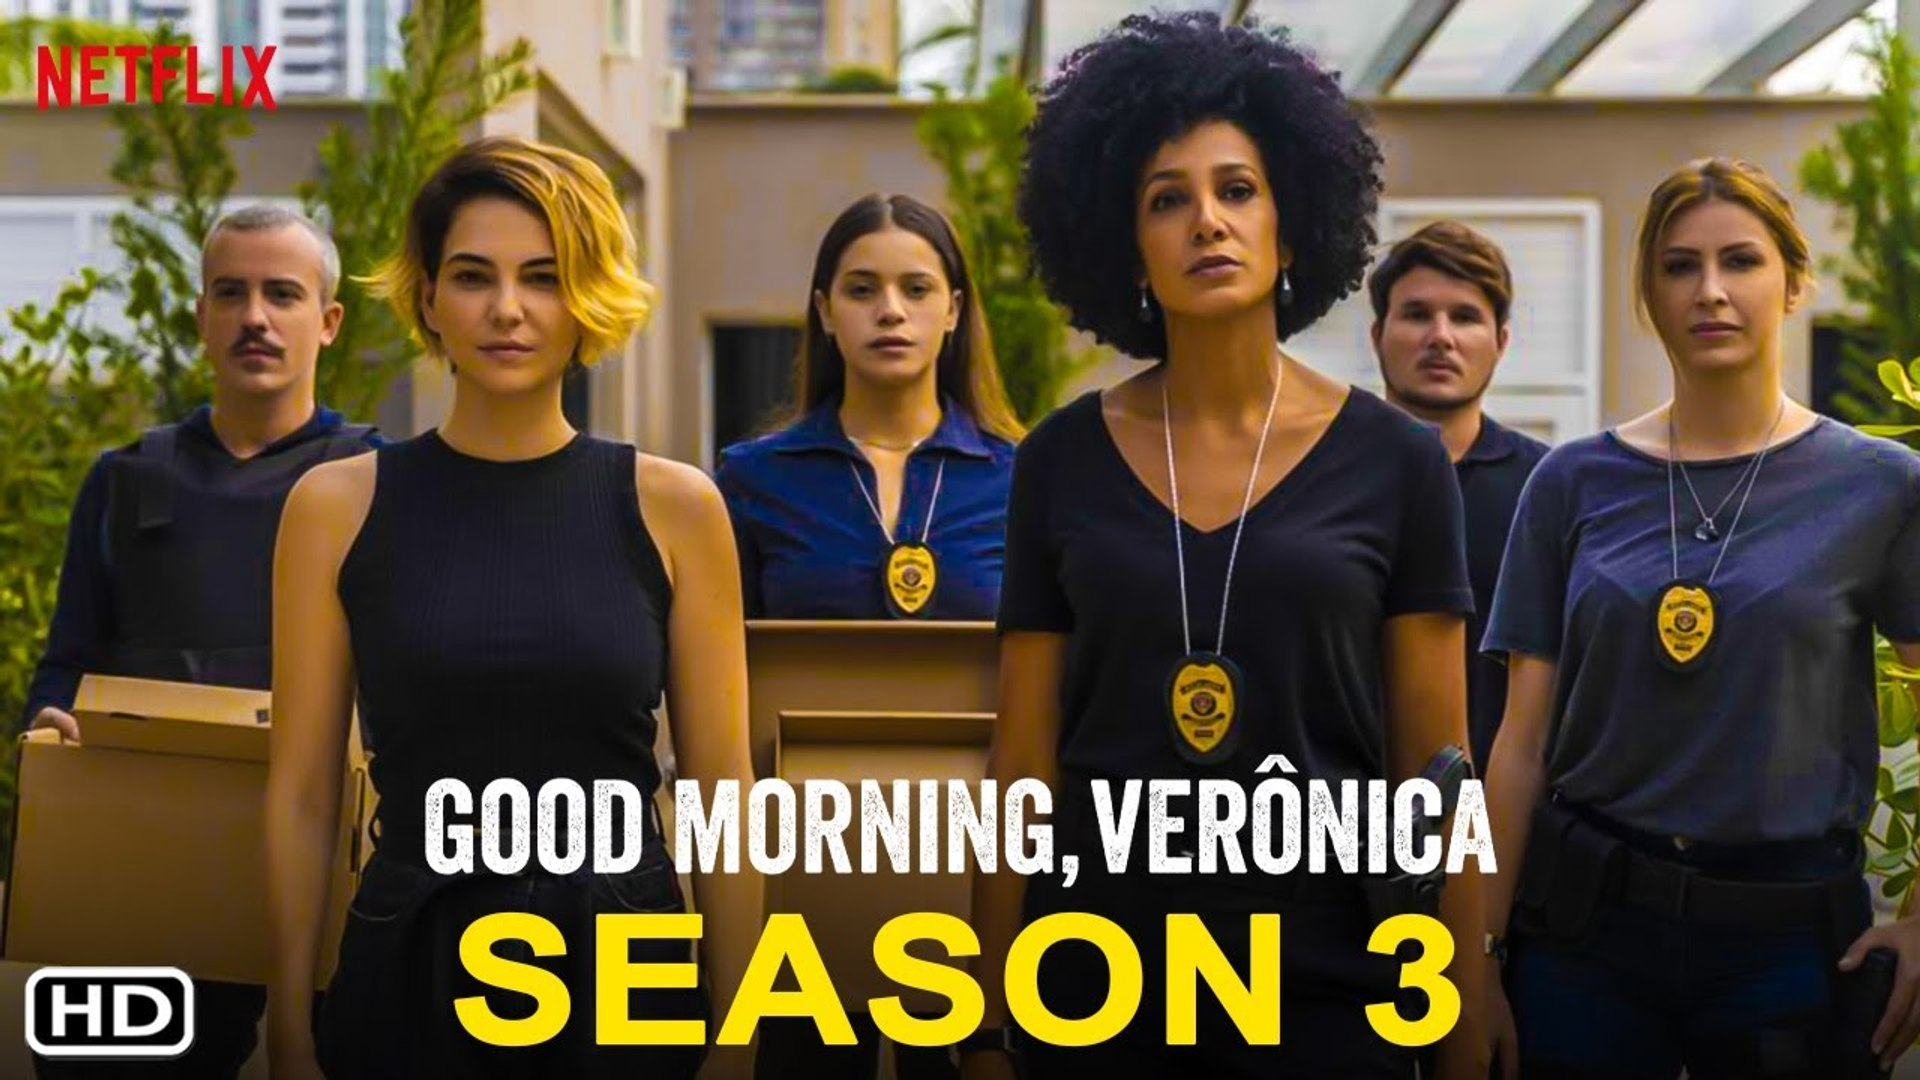 Good Morning Veronica Season 3: Release Date, Cast, Trailer, Release Date US, Where to Watch?